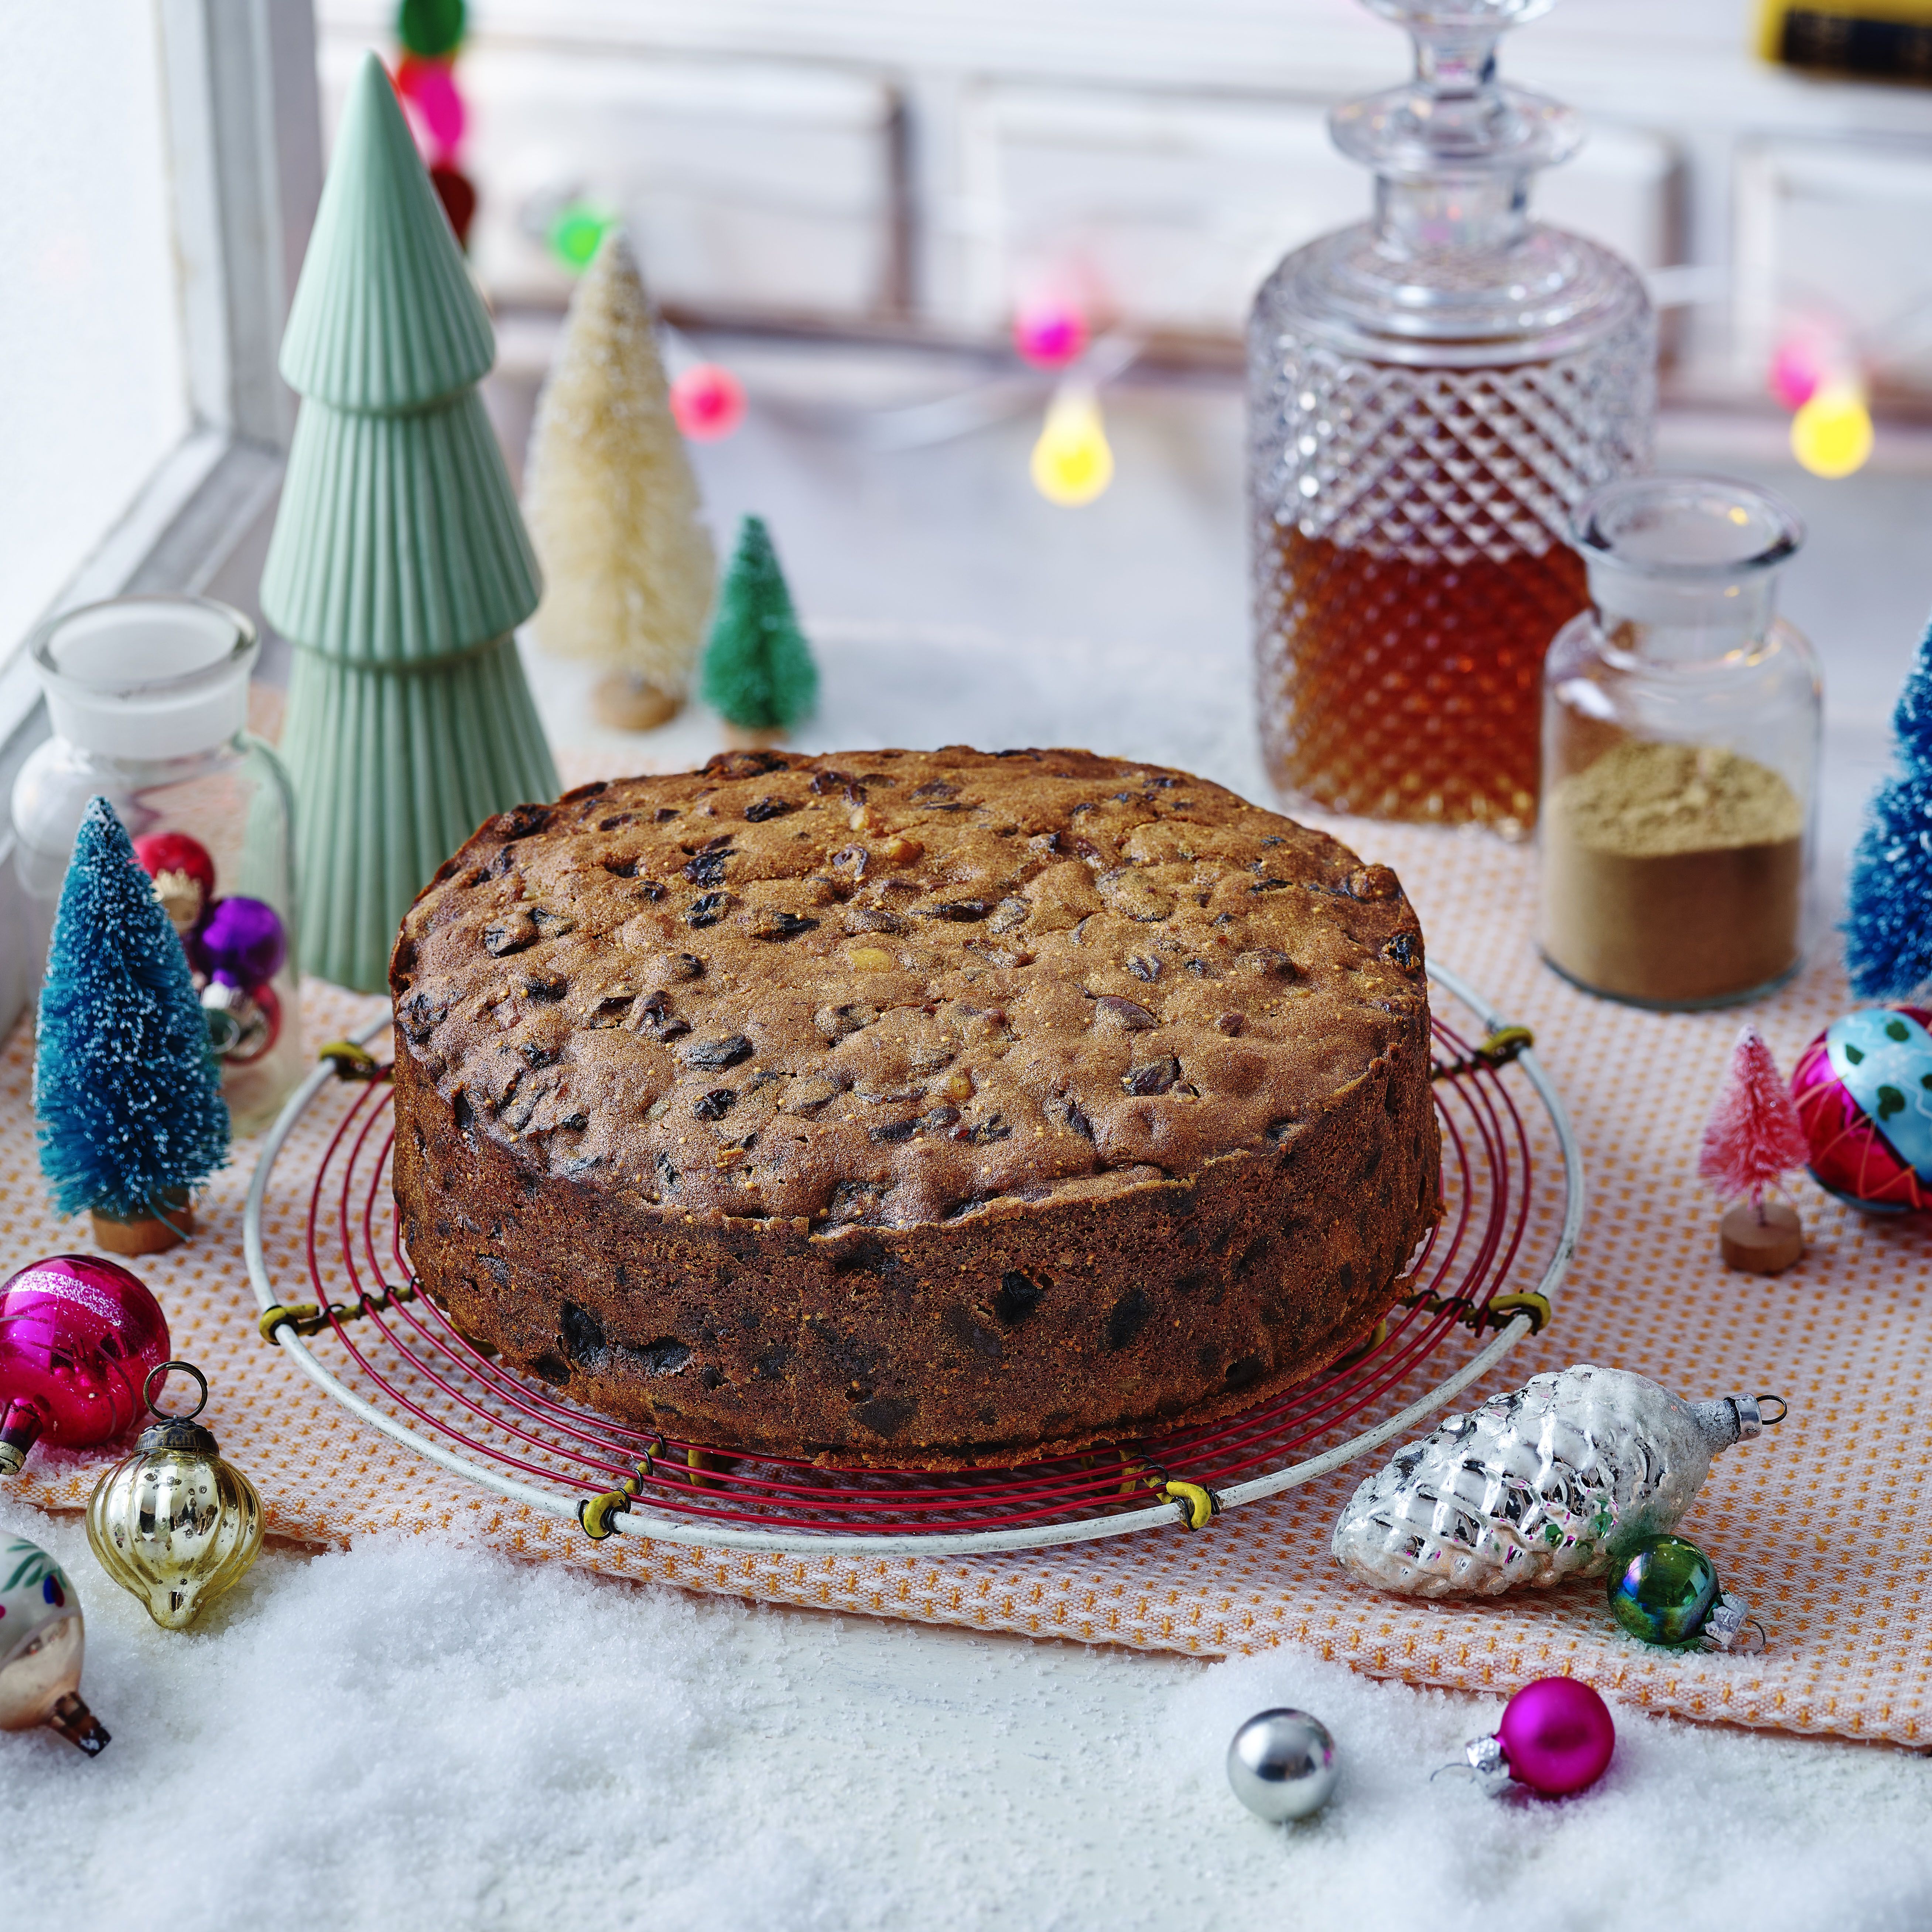 How to ice a Christmas cake the easy way - BBC Food